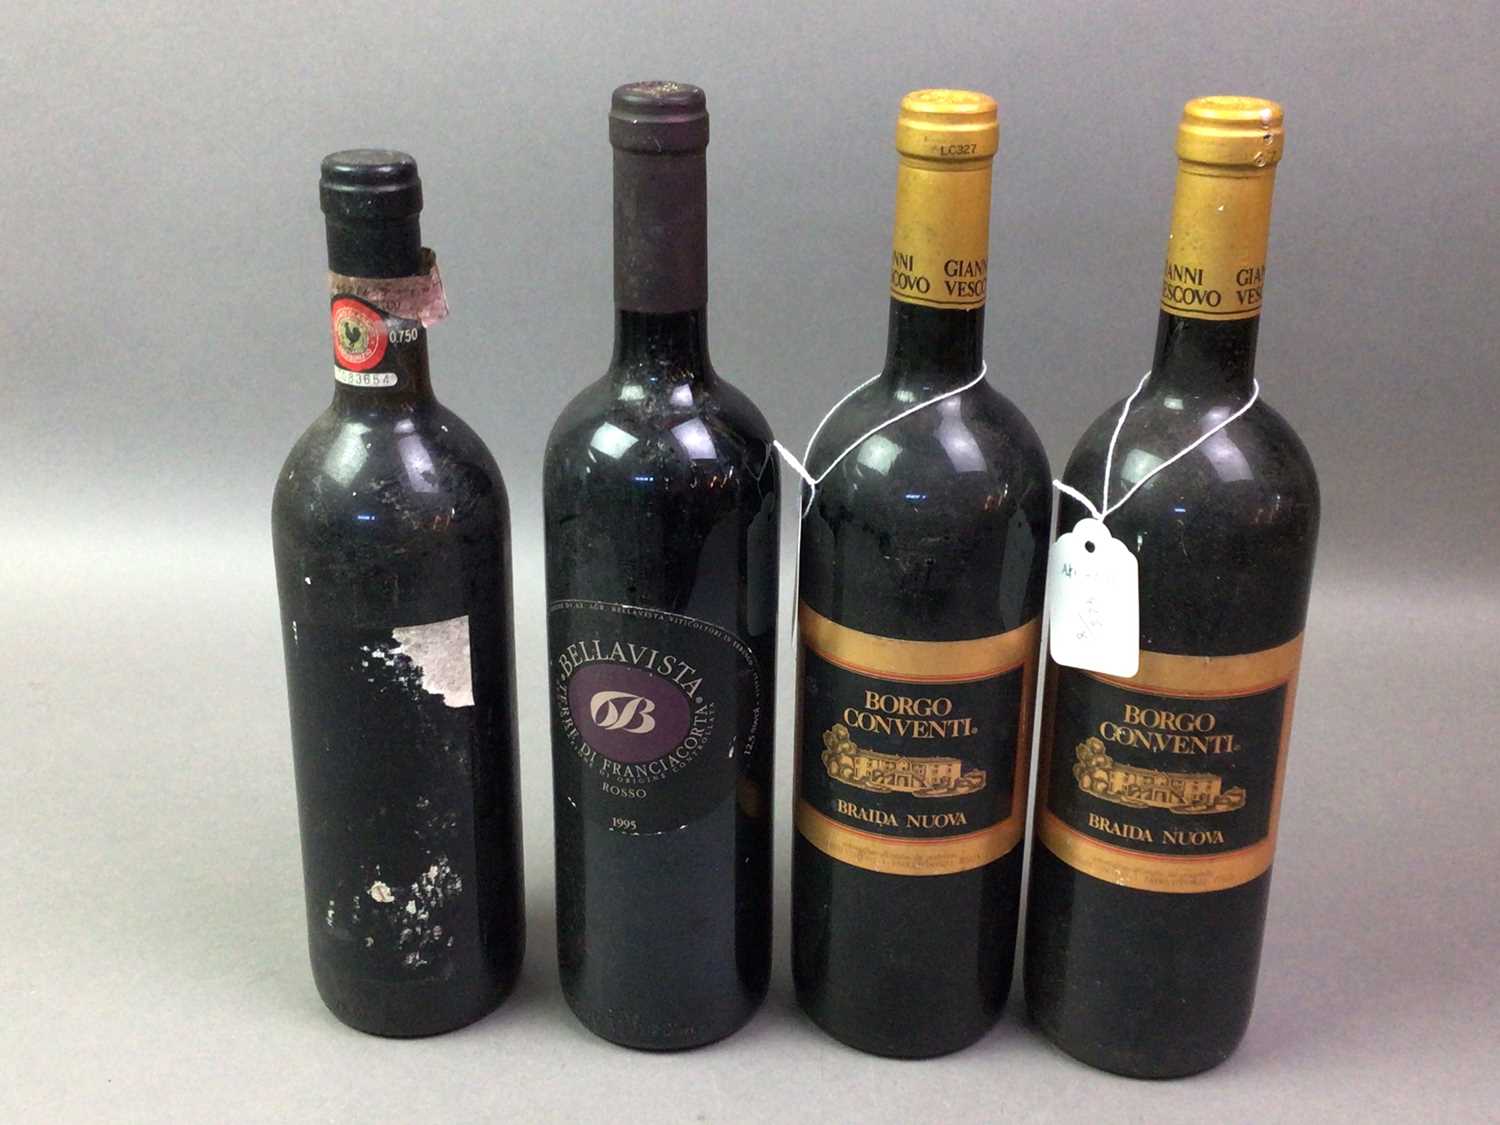 8 BOTTLES OF ITALIAN RED WINE INCLUDING SELLA & MOSCA 1989 MARCHESE DI VILLAMARINA - Image 2 of 2